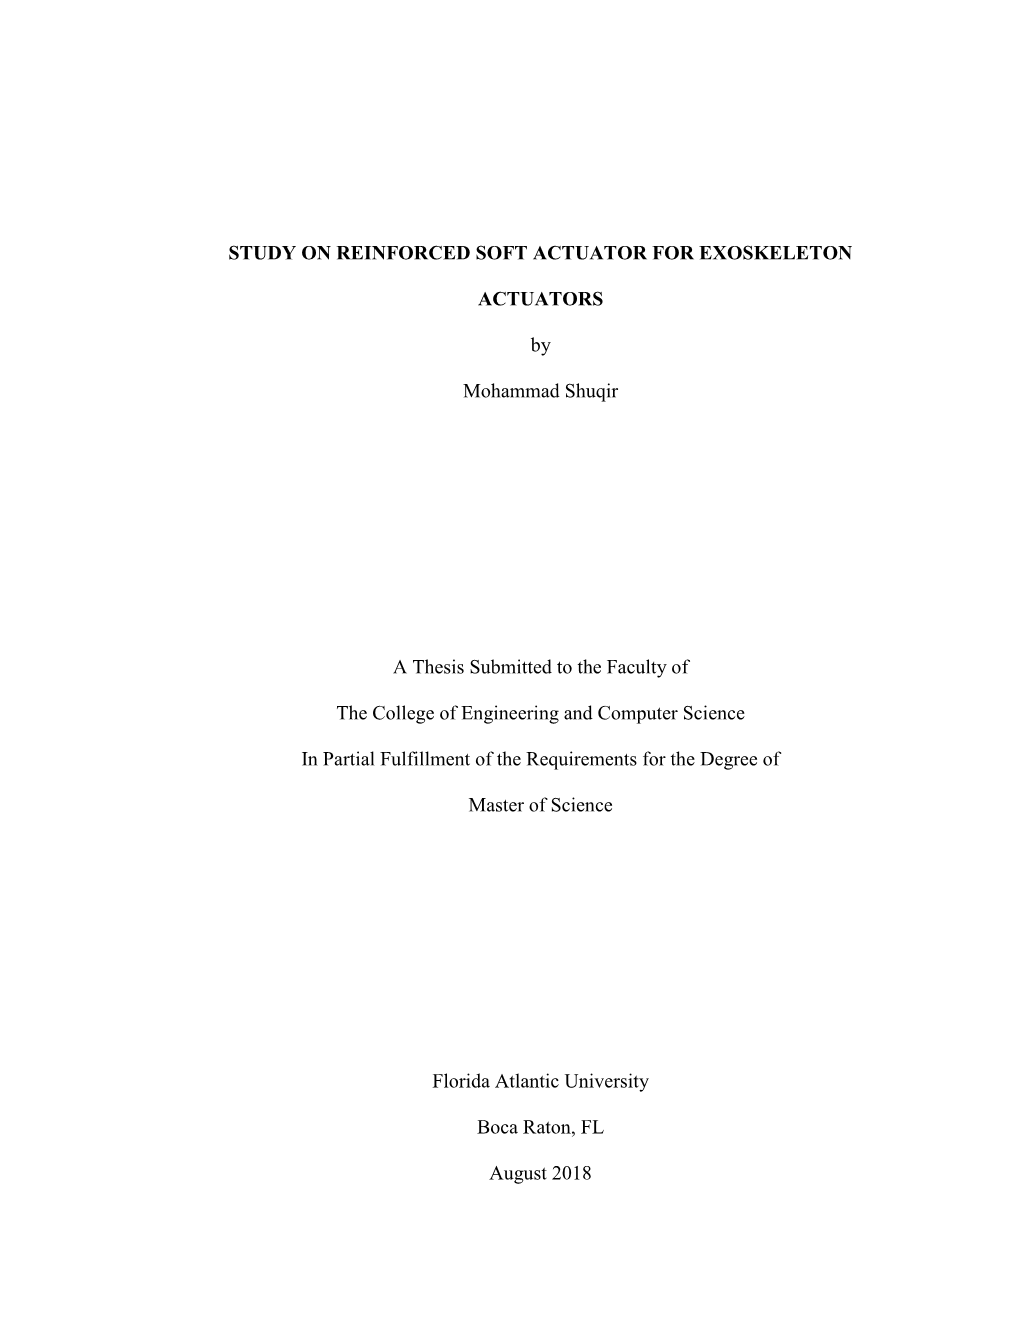 STUDY on REINFORCED SOFT ACTUATOR for EXOSKELETON ACTUATORS by Mohammad Shuqir a Thesis Submitted to the Faculty of the College